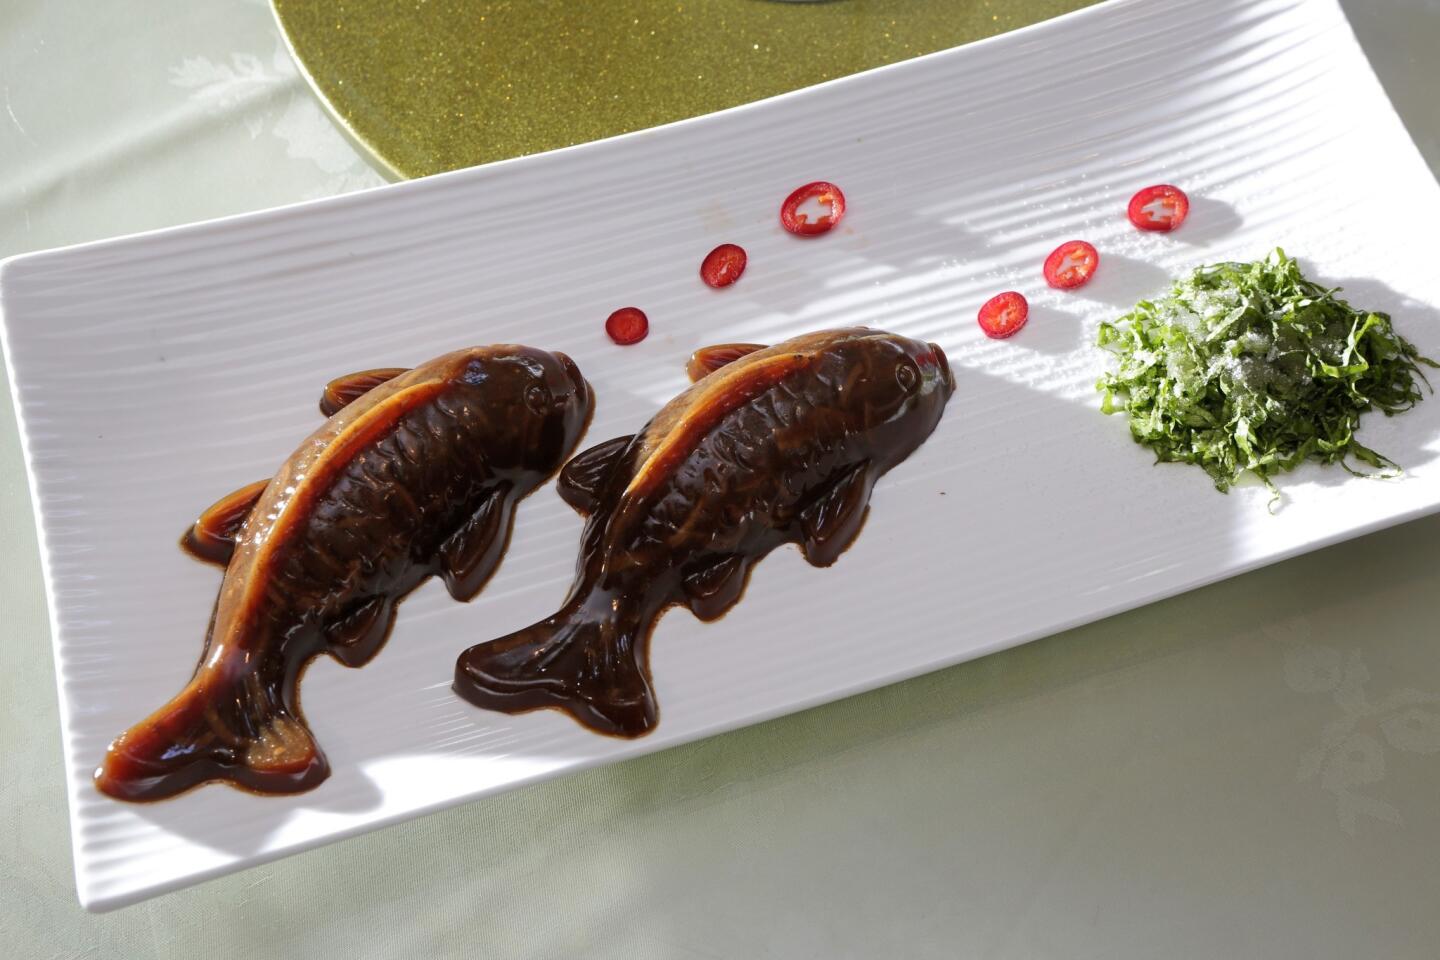 The koi jello is a chilled concoction of jellied pigskin molded into the shape of a swimming fish, presented with rings of sliced pepper emerging from its mouth.